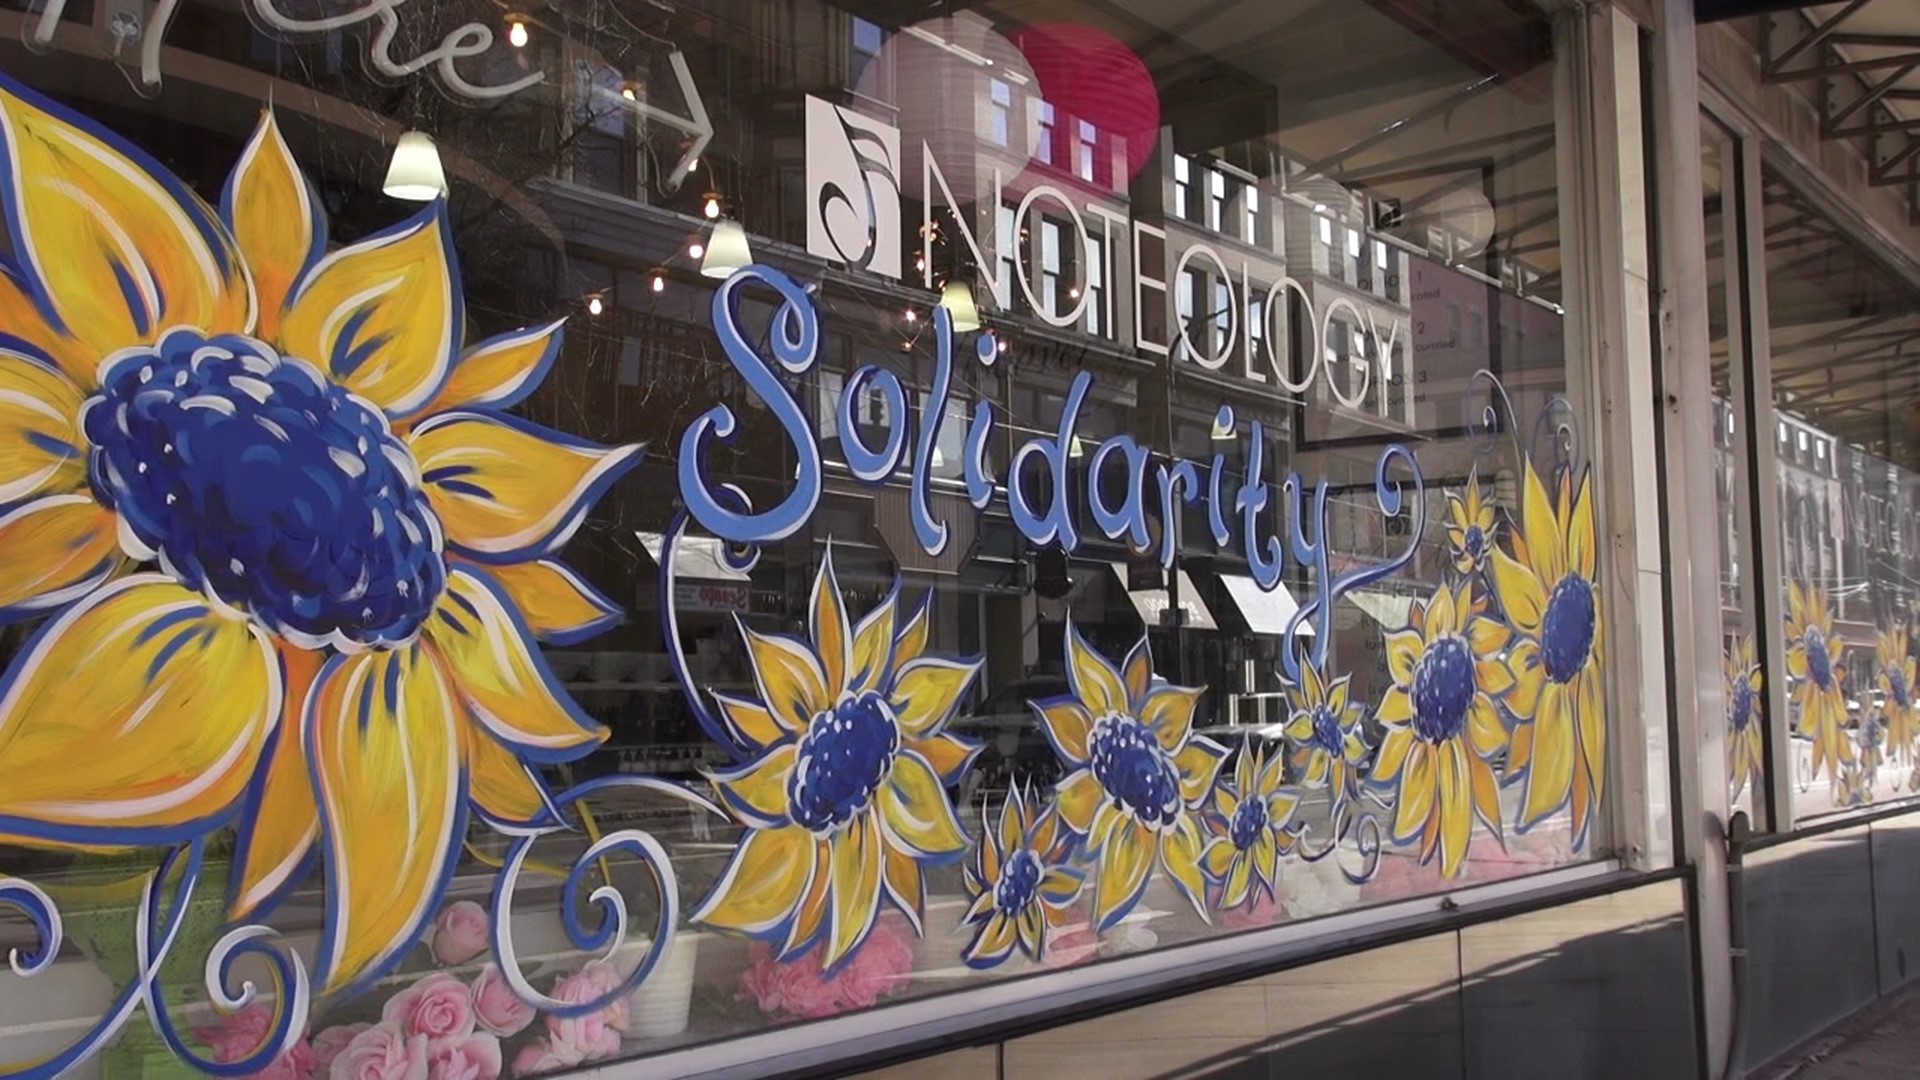 An effort in the Electric City to support the people of Ukraine has taken off. Storefronts and buildings all over the city are decked out in blue and yellow.